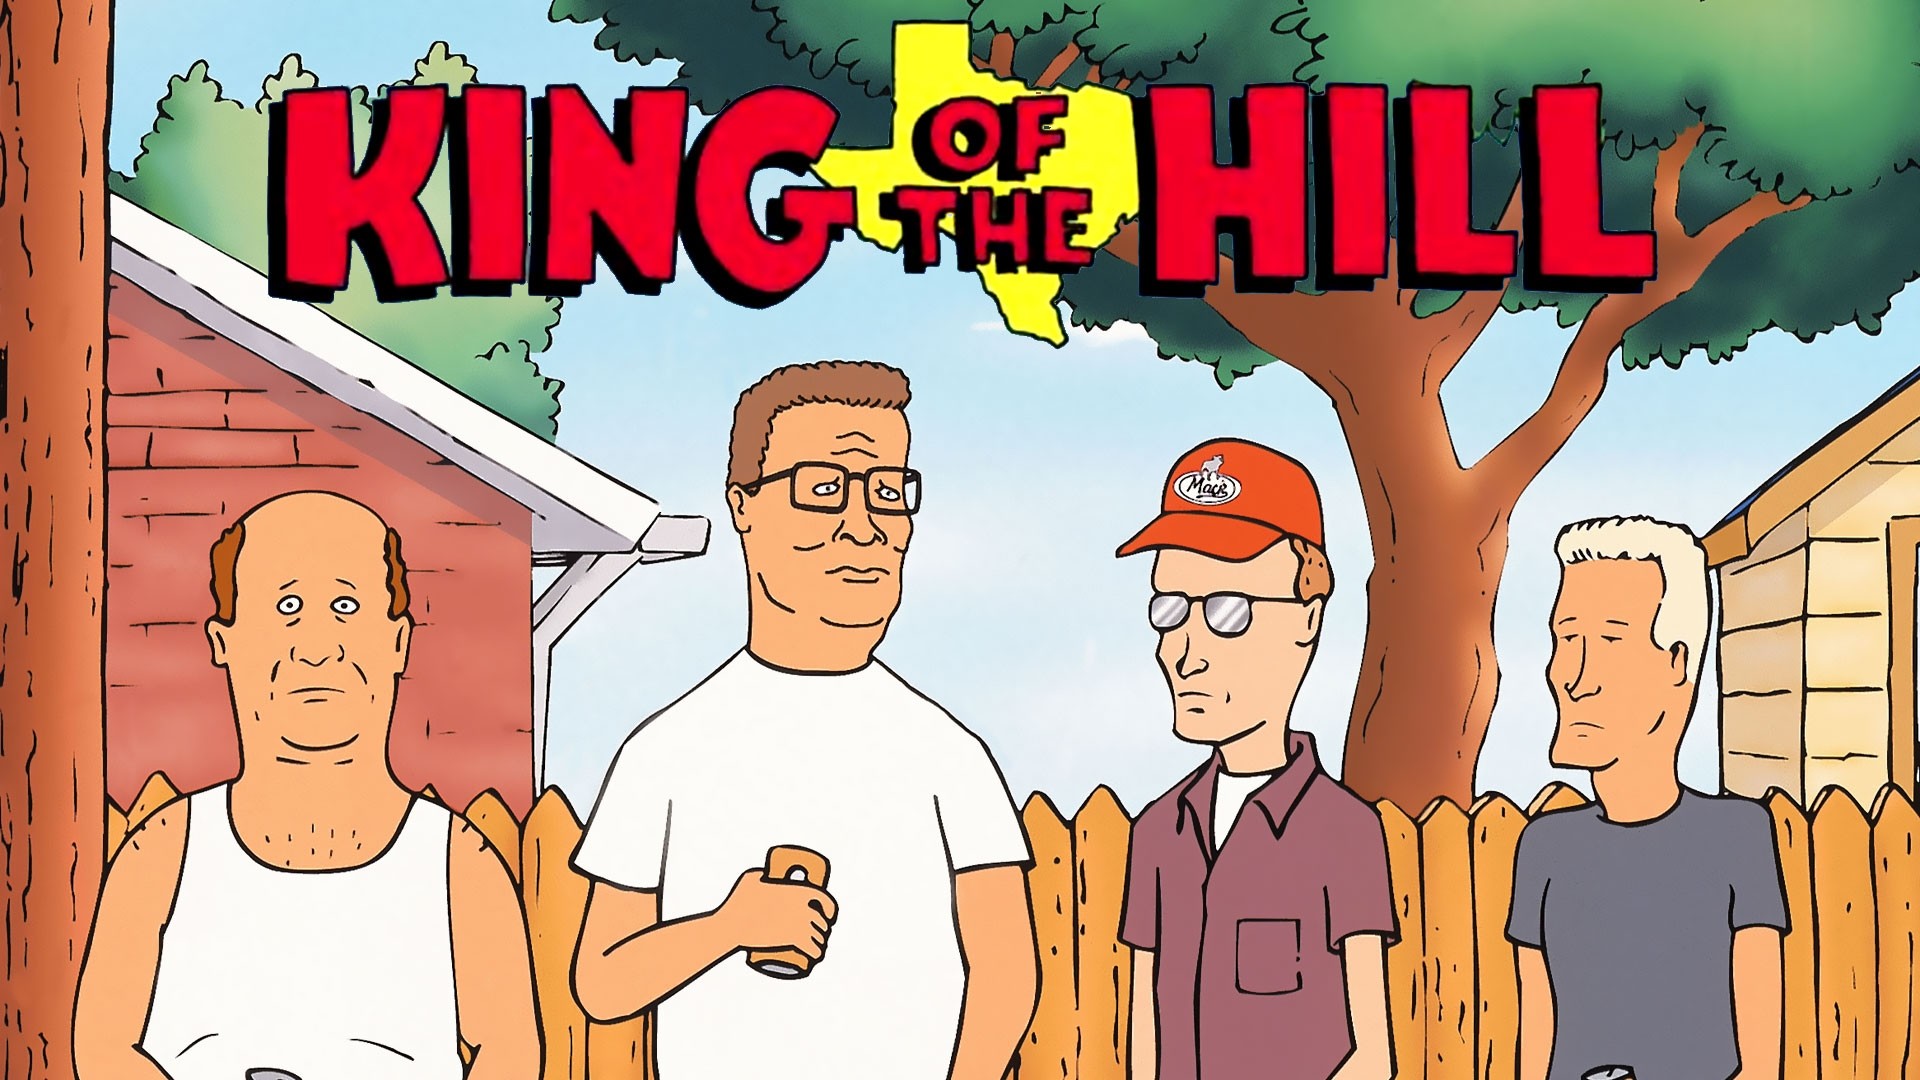 King of the Hill Wallpaper.